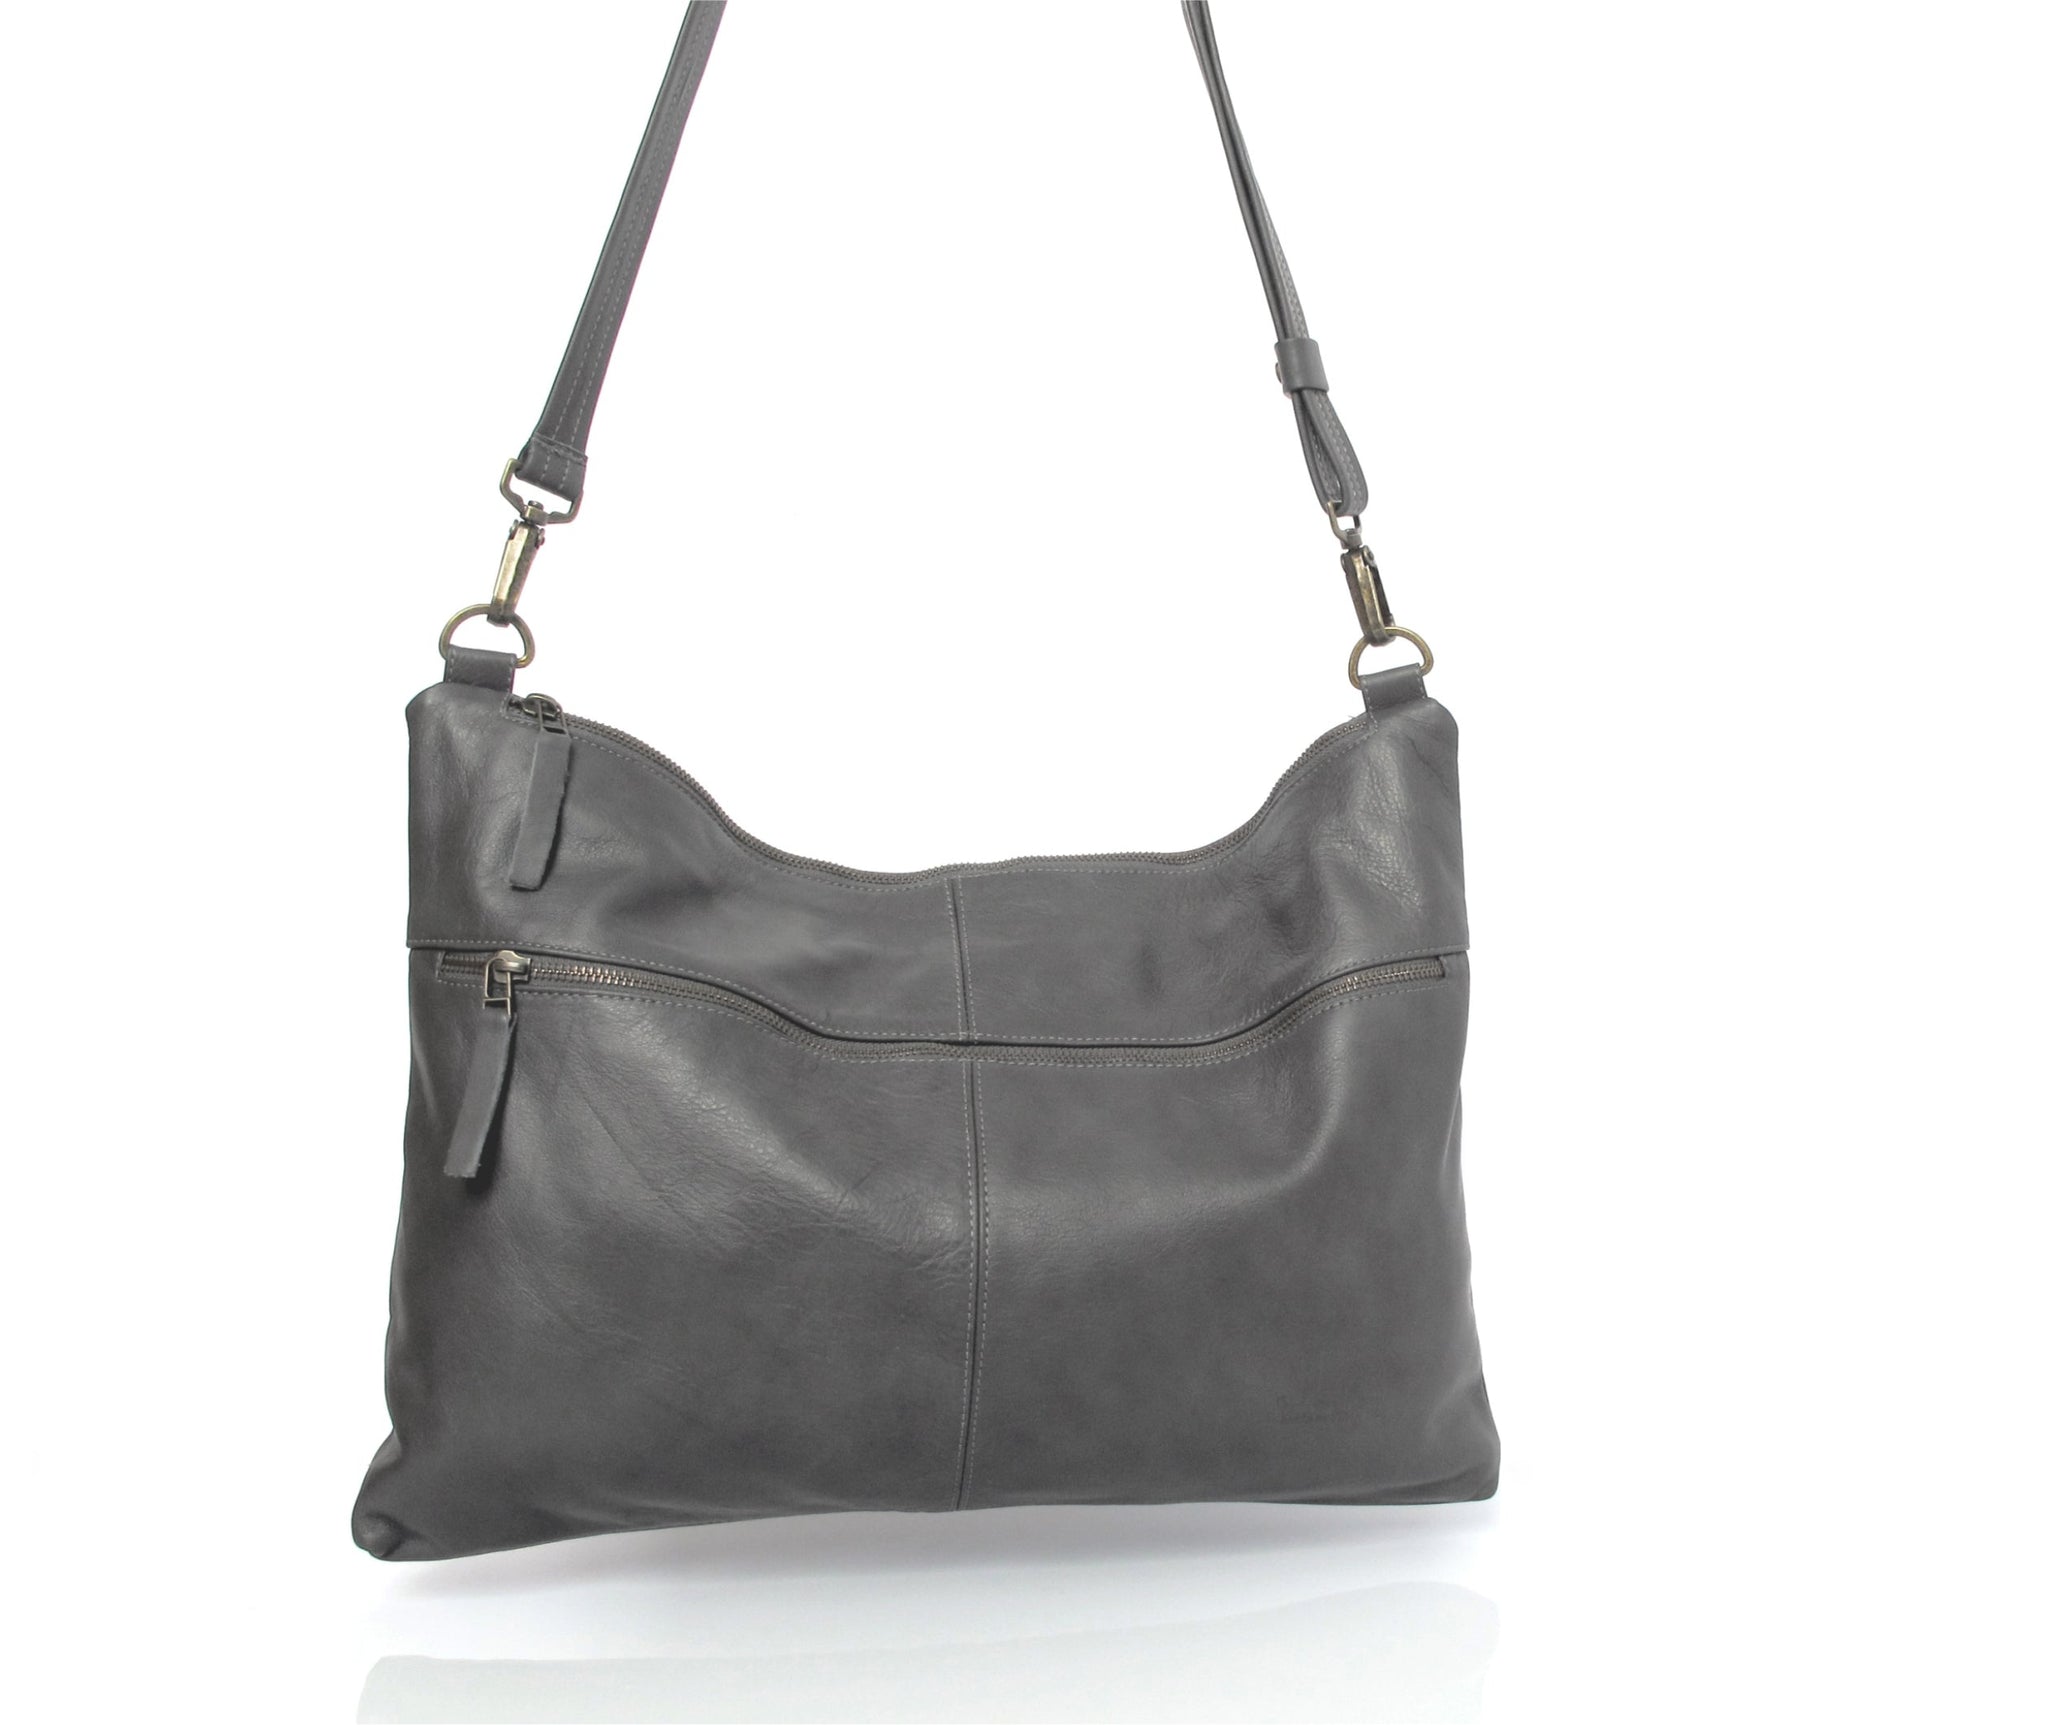 gray designer messenger bag handmade with soft Italian Napa leather suitable for laptops up to 17in with adjustable & detachable matching leather strap can be carries as a crossbody bag, shoulder bag, oversized clutch